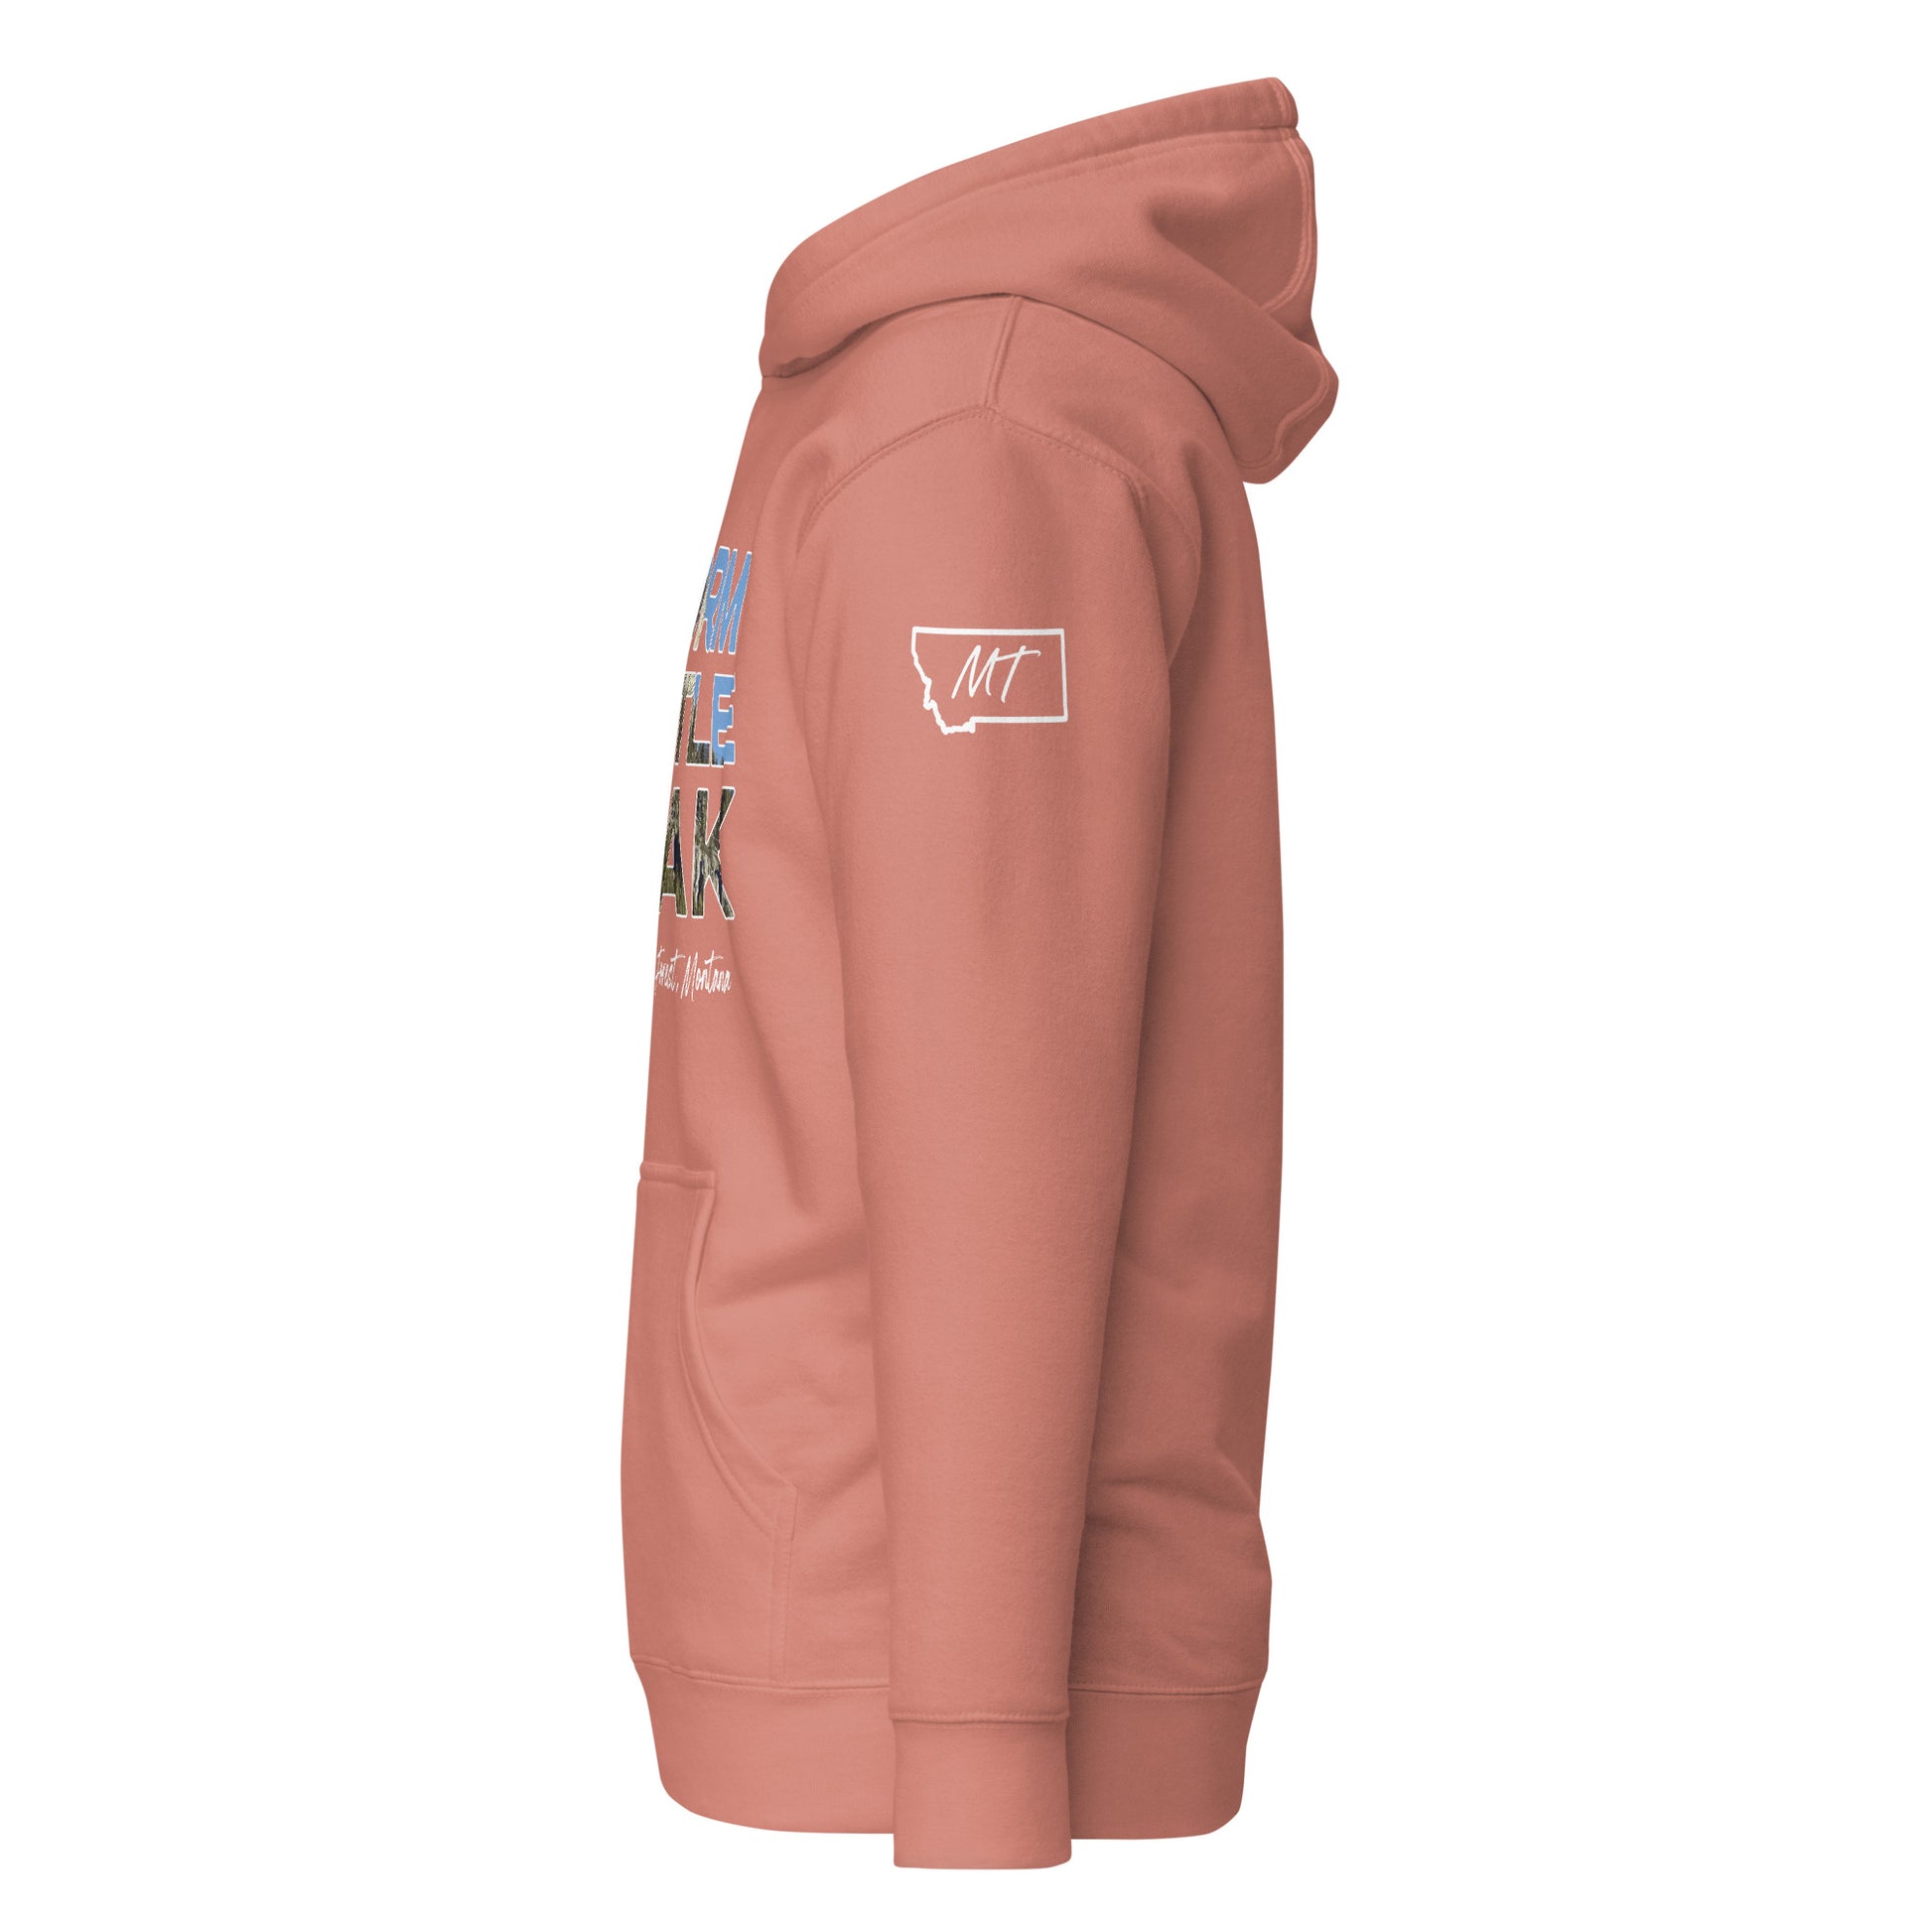 Left Side view of Storm Castle Peak in Custer Gallatin National Forest Montana Dusty Rose Soft Hoodie from Park Attire